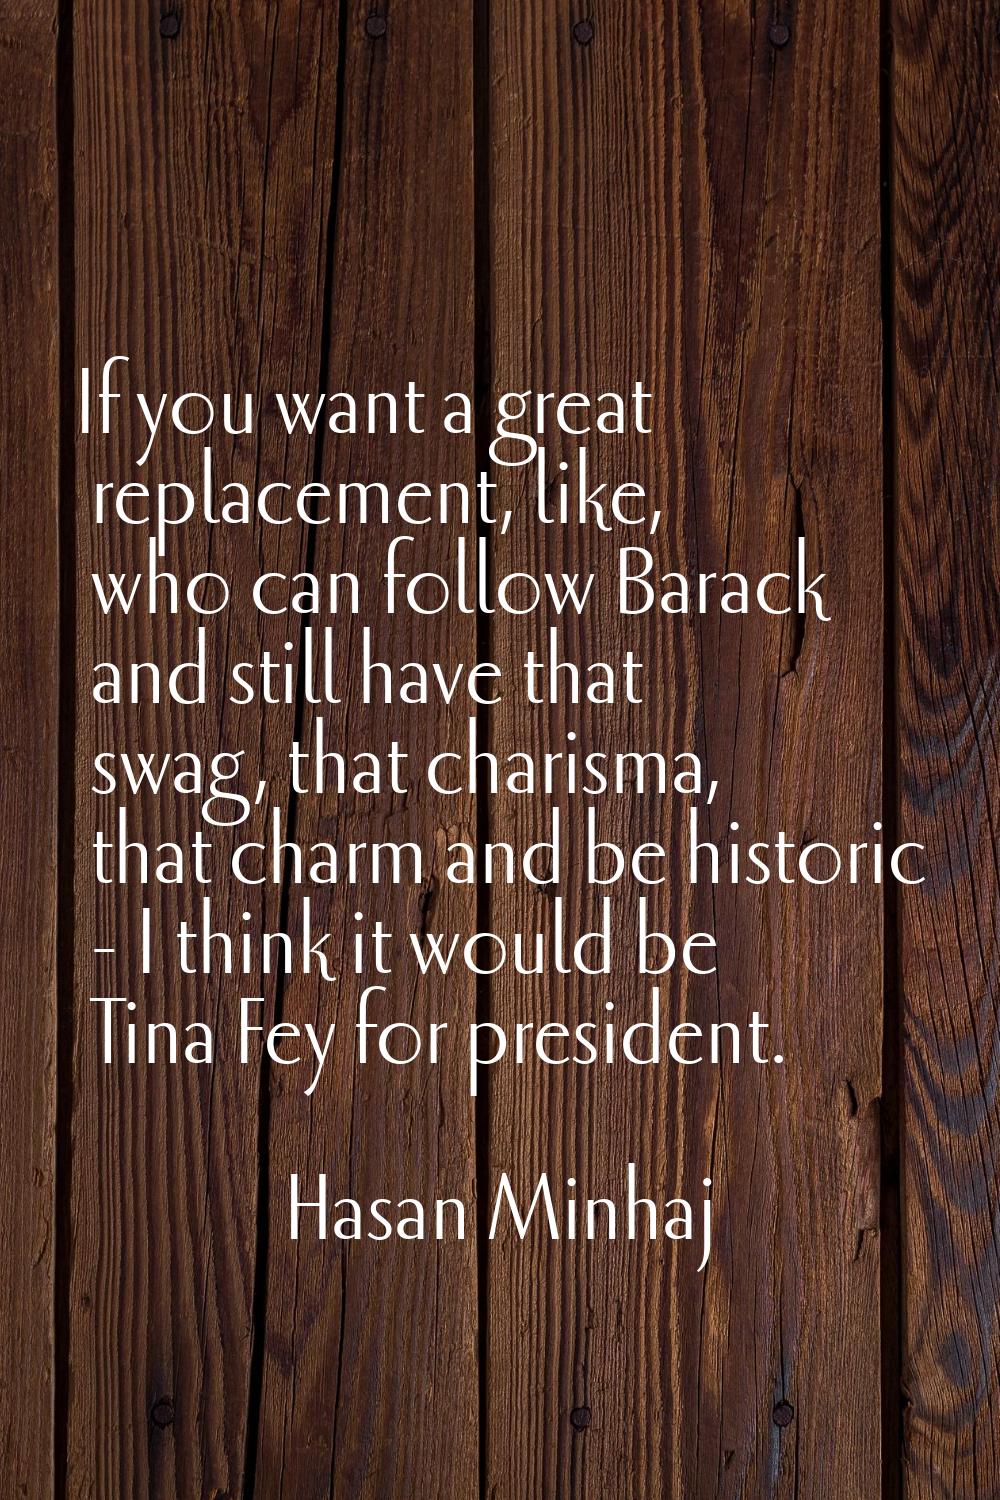 If you want a great replacement, like, who can follow Barack and still have that swag, that charism